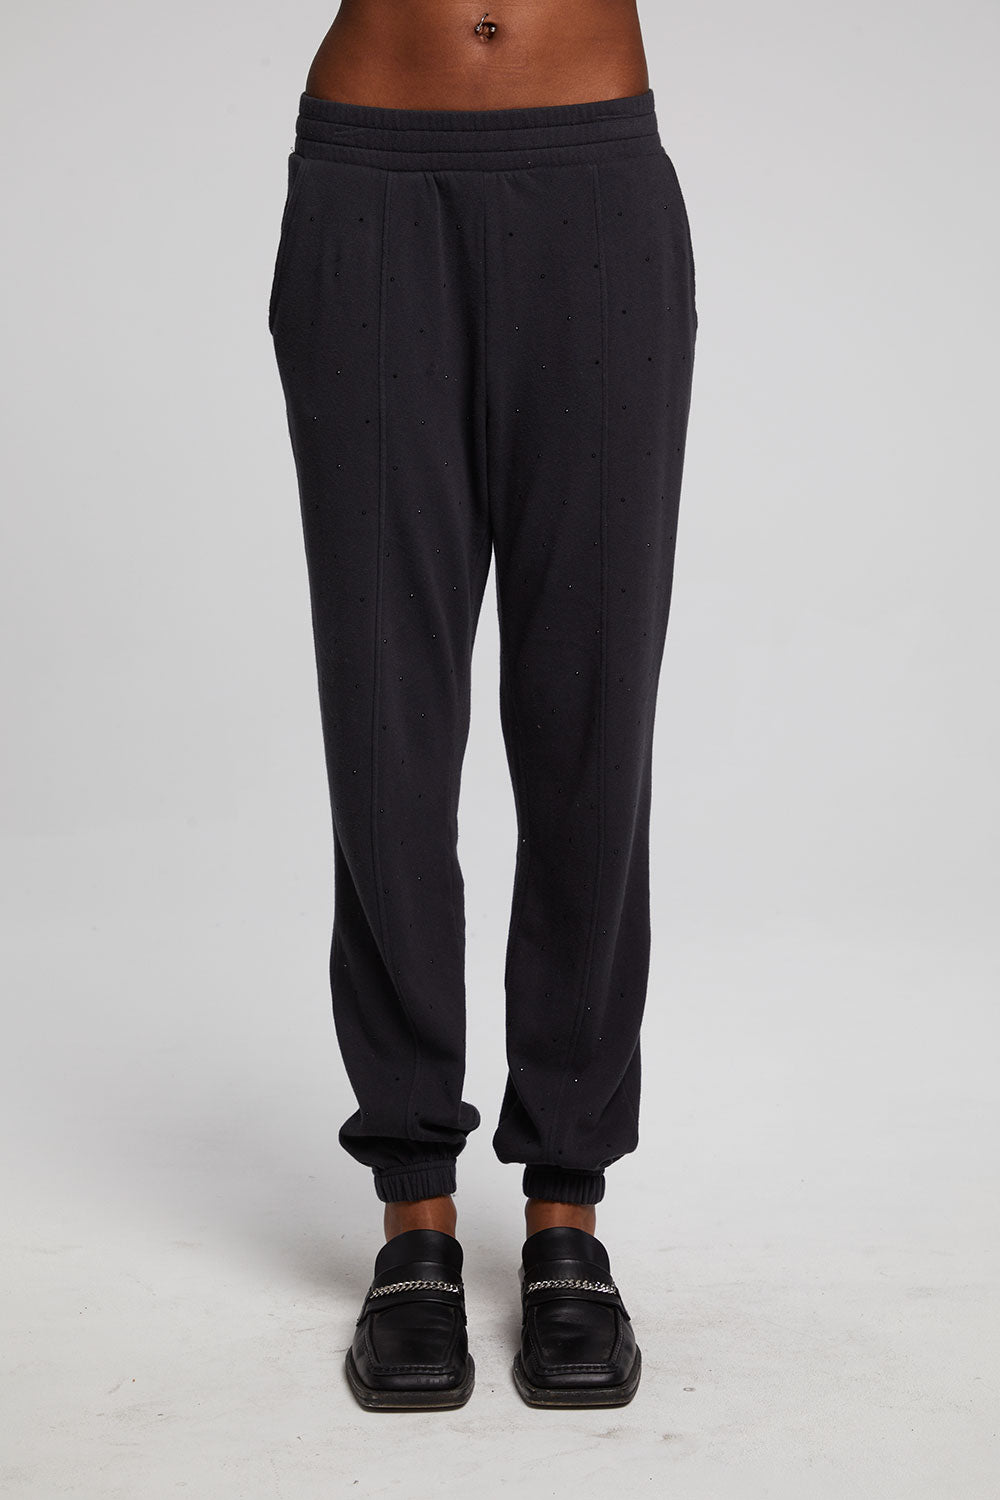 Essential Licorice Jogger WOMENS chaserbrand